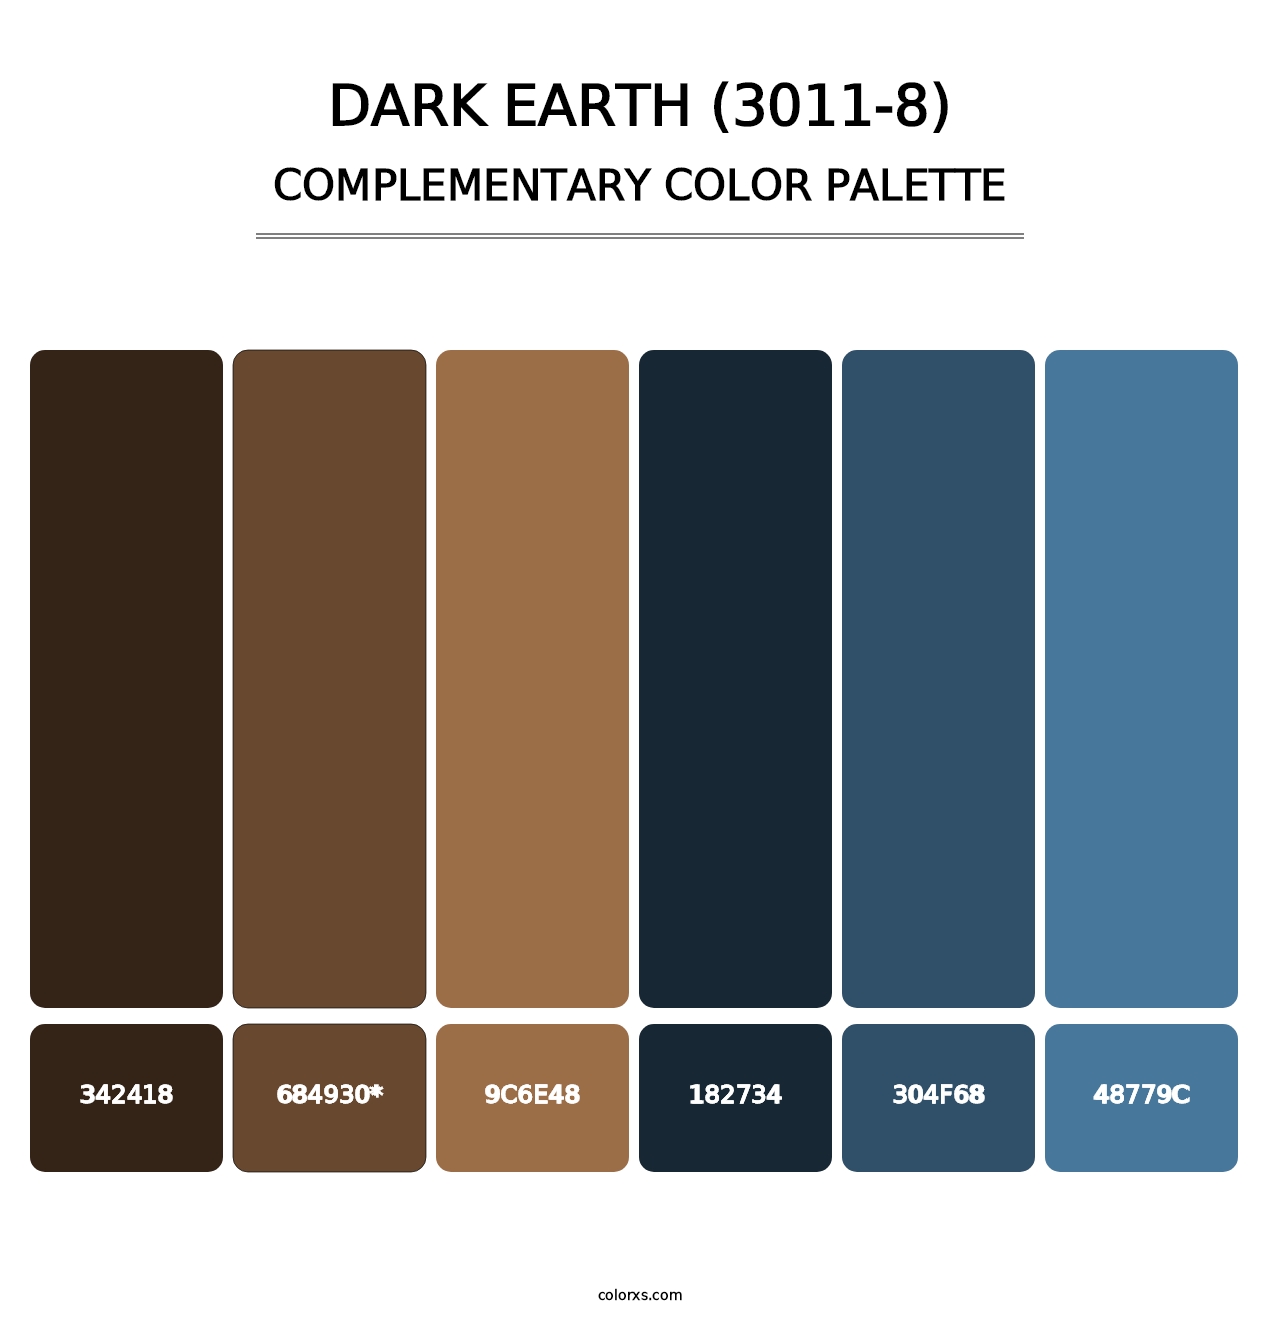 Dark Earth (3011-8) - Complementary Color Palette